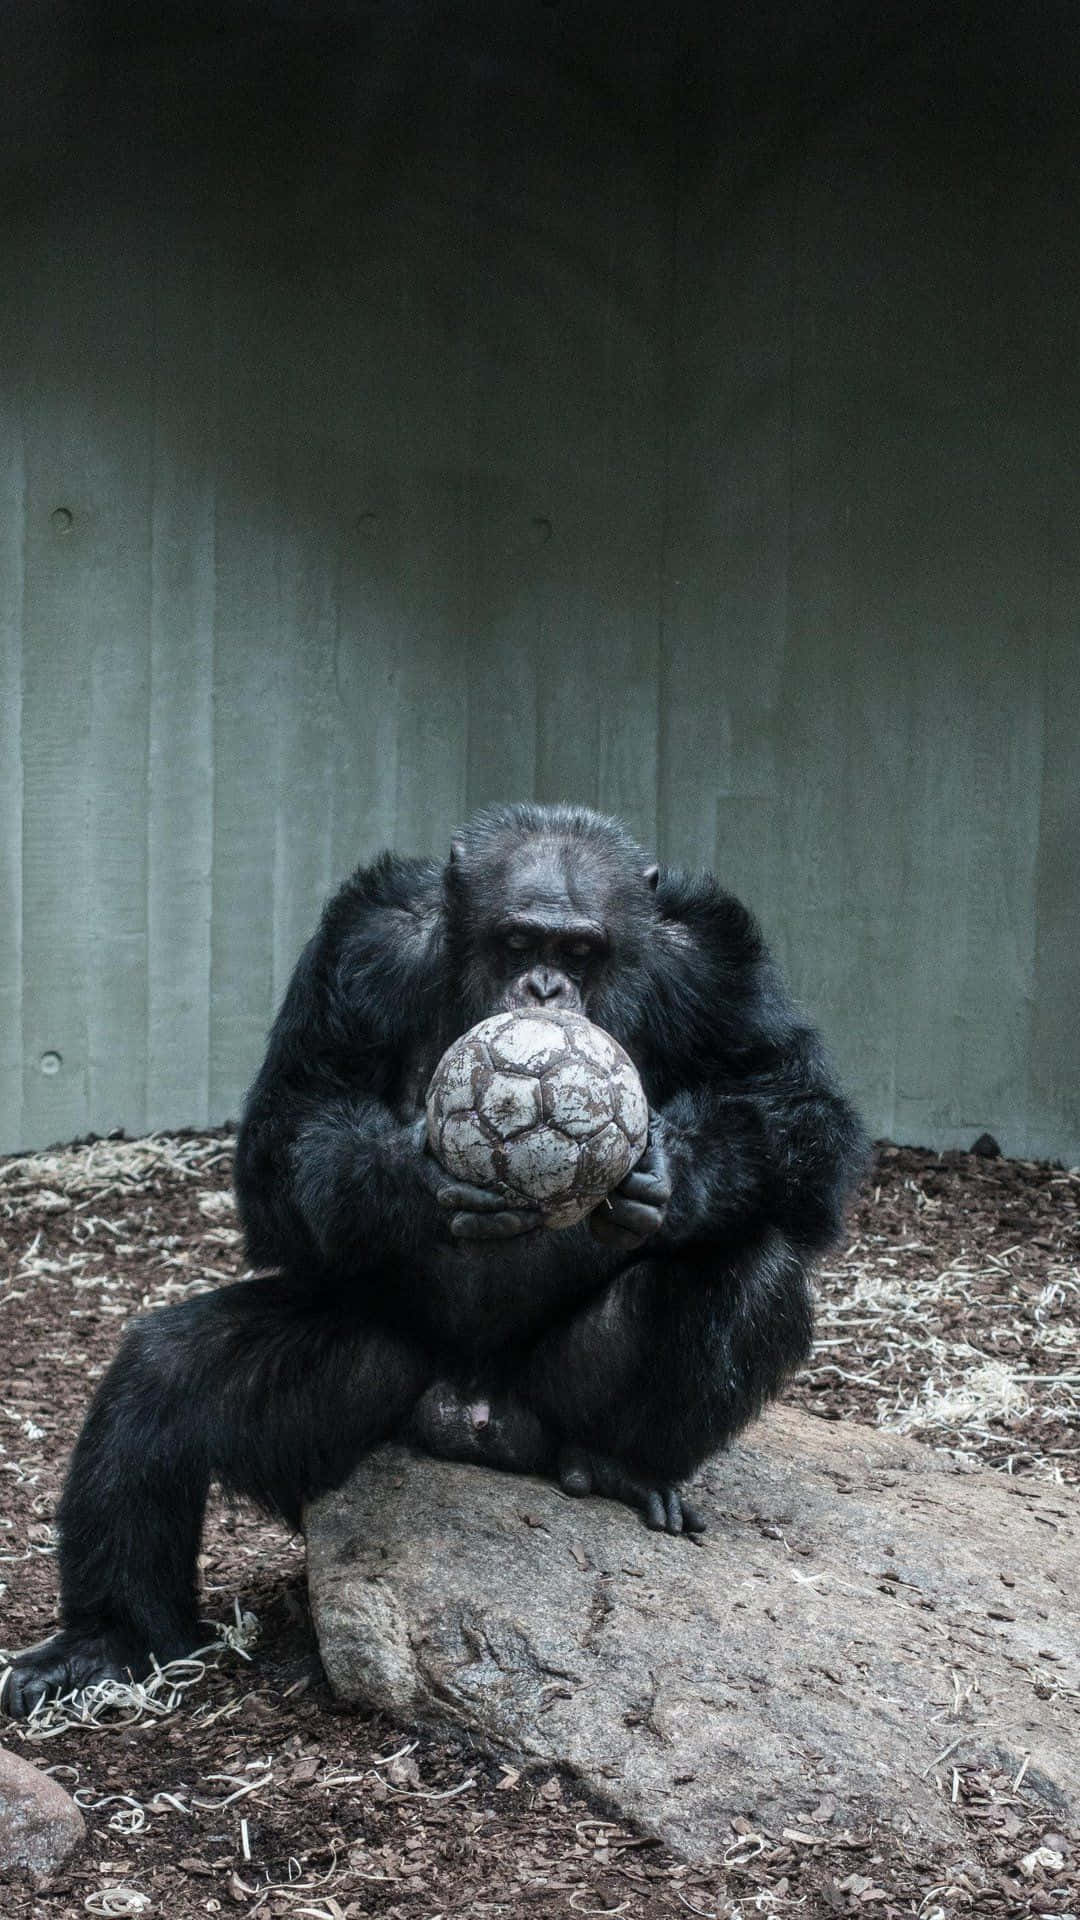 Pixel 3 Gorilla With A Soccer Ball Background